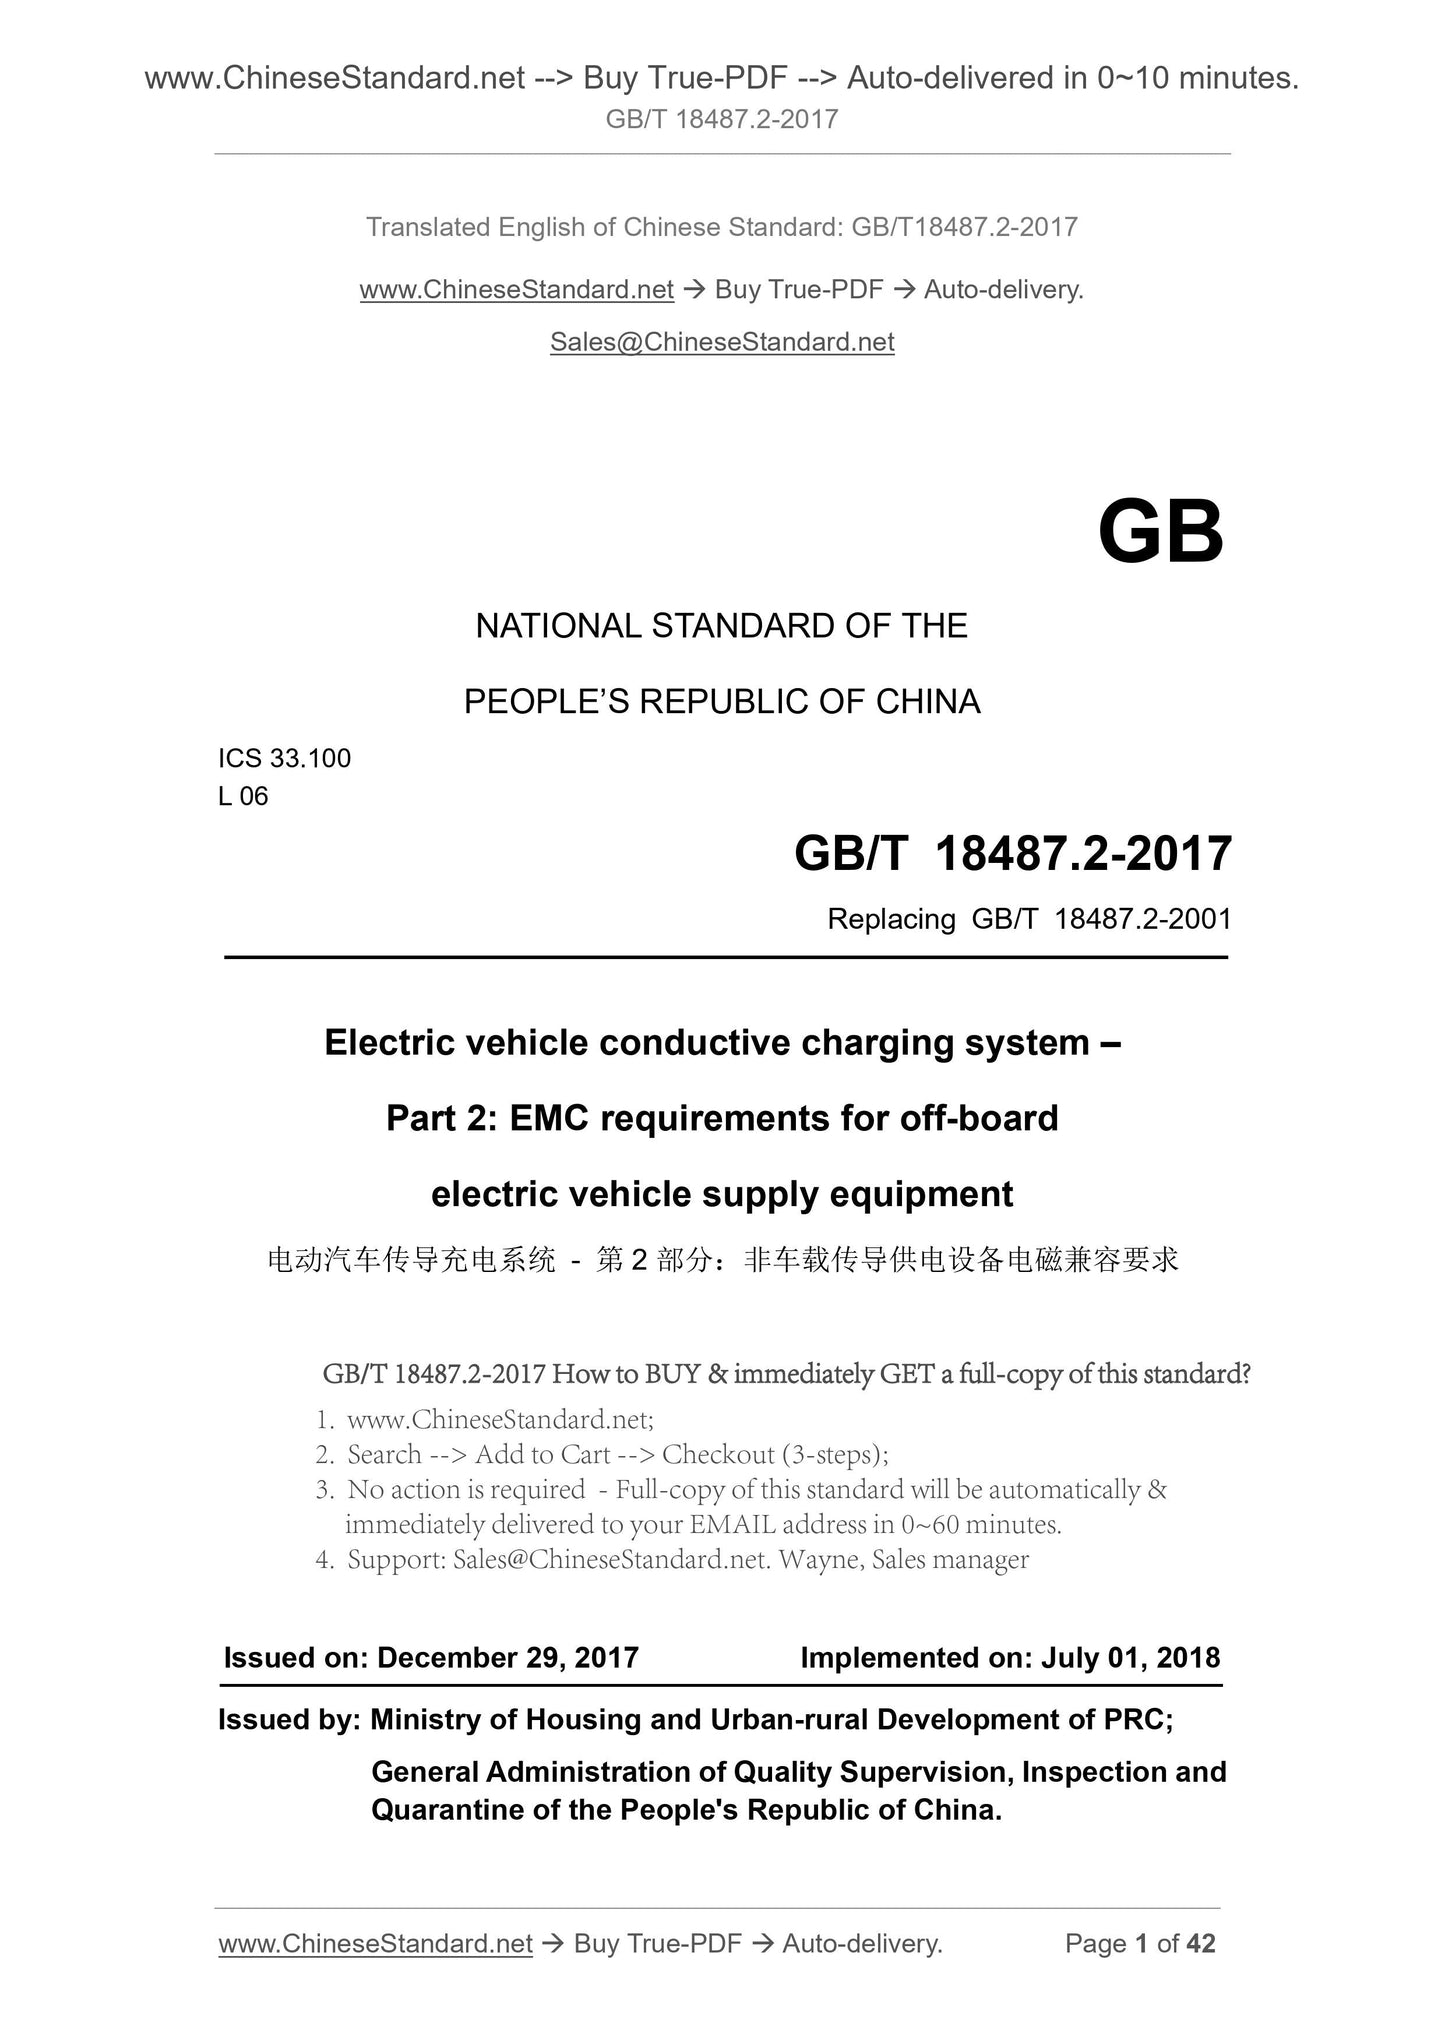 GB/T 18487.2-2017 Page 1